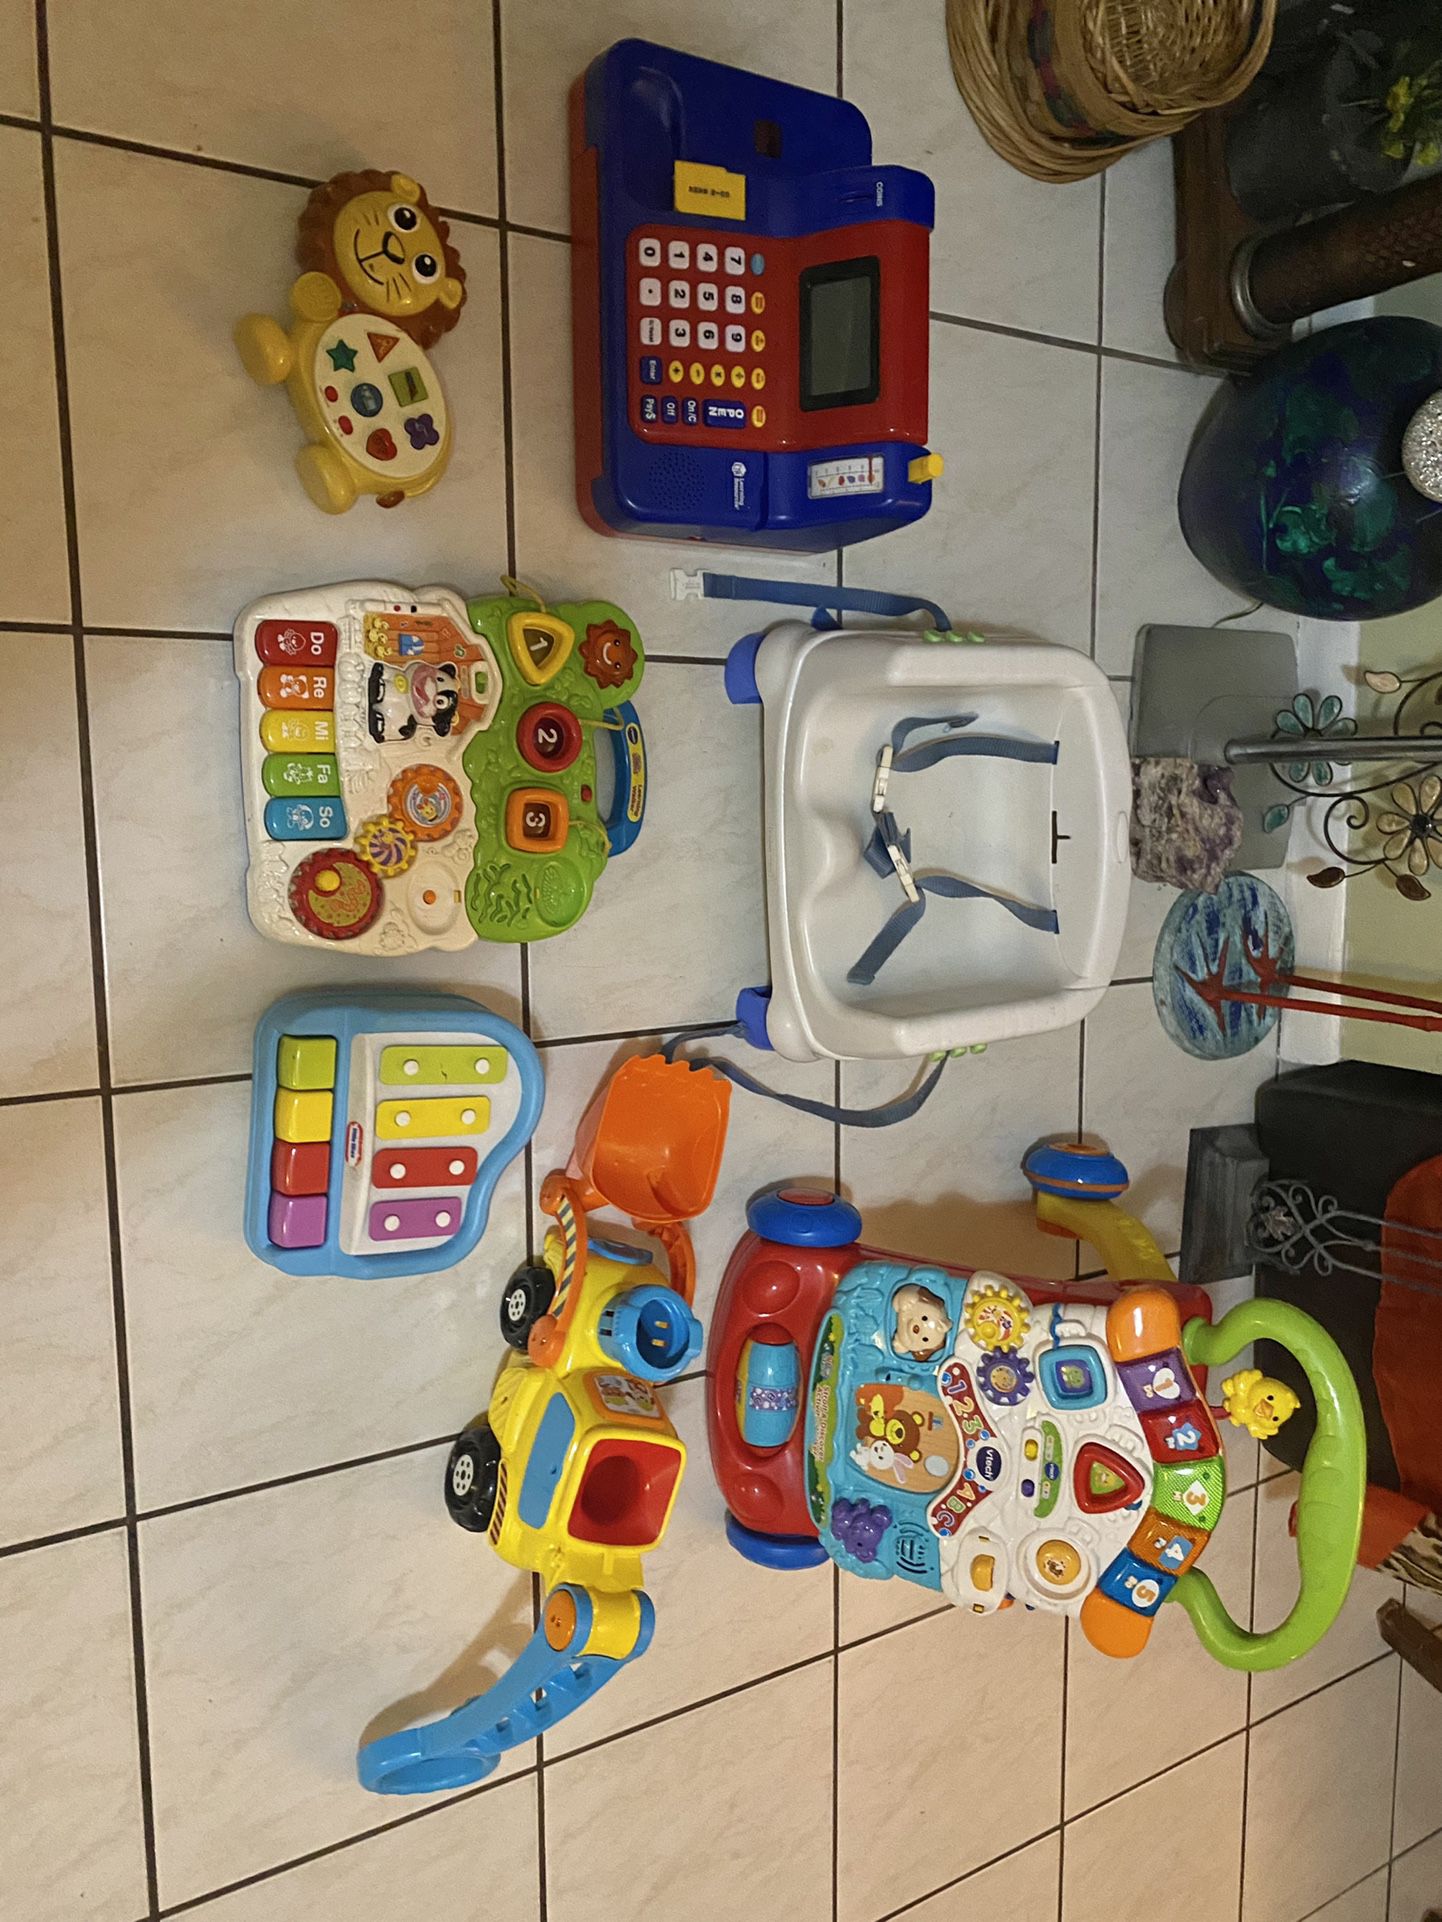 Halloween costumes, Booster chair, play kitchen set,